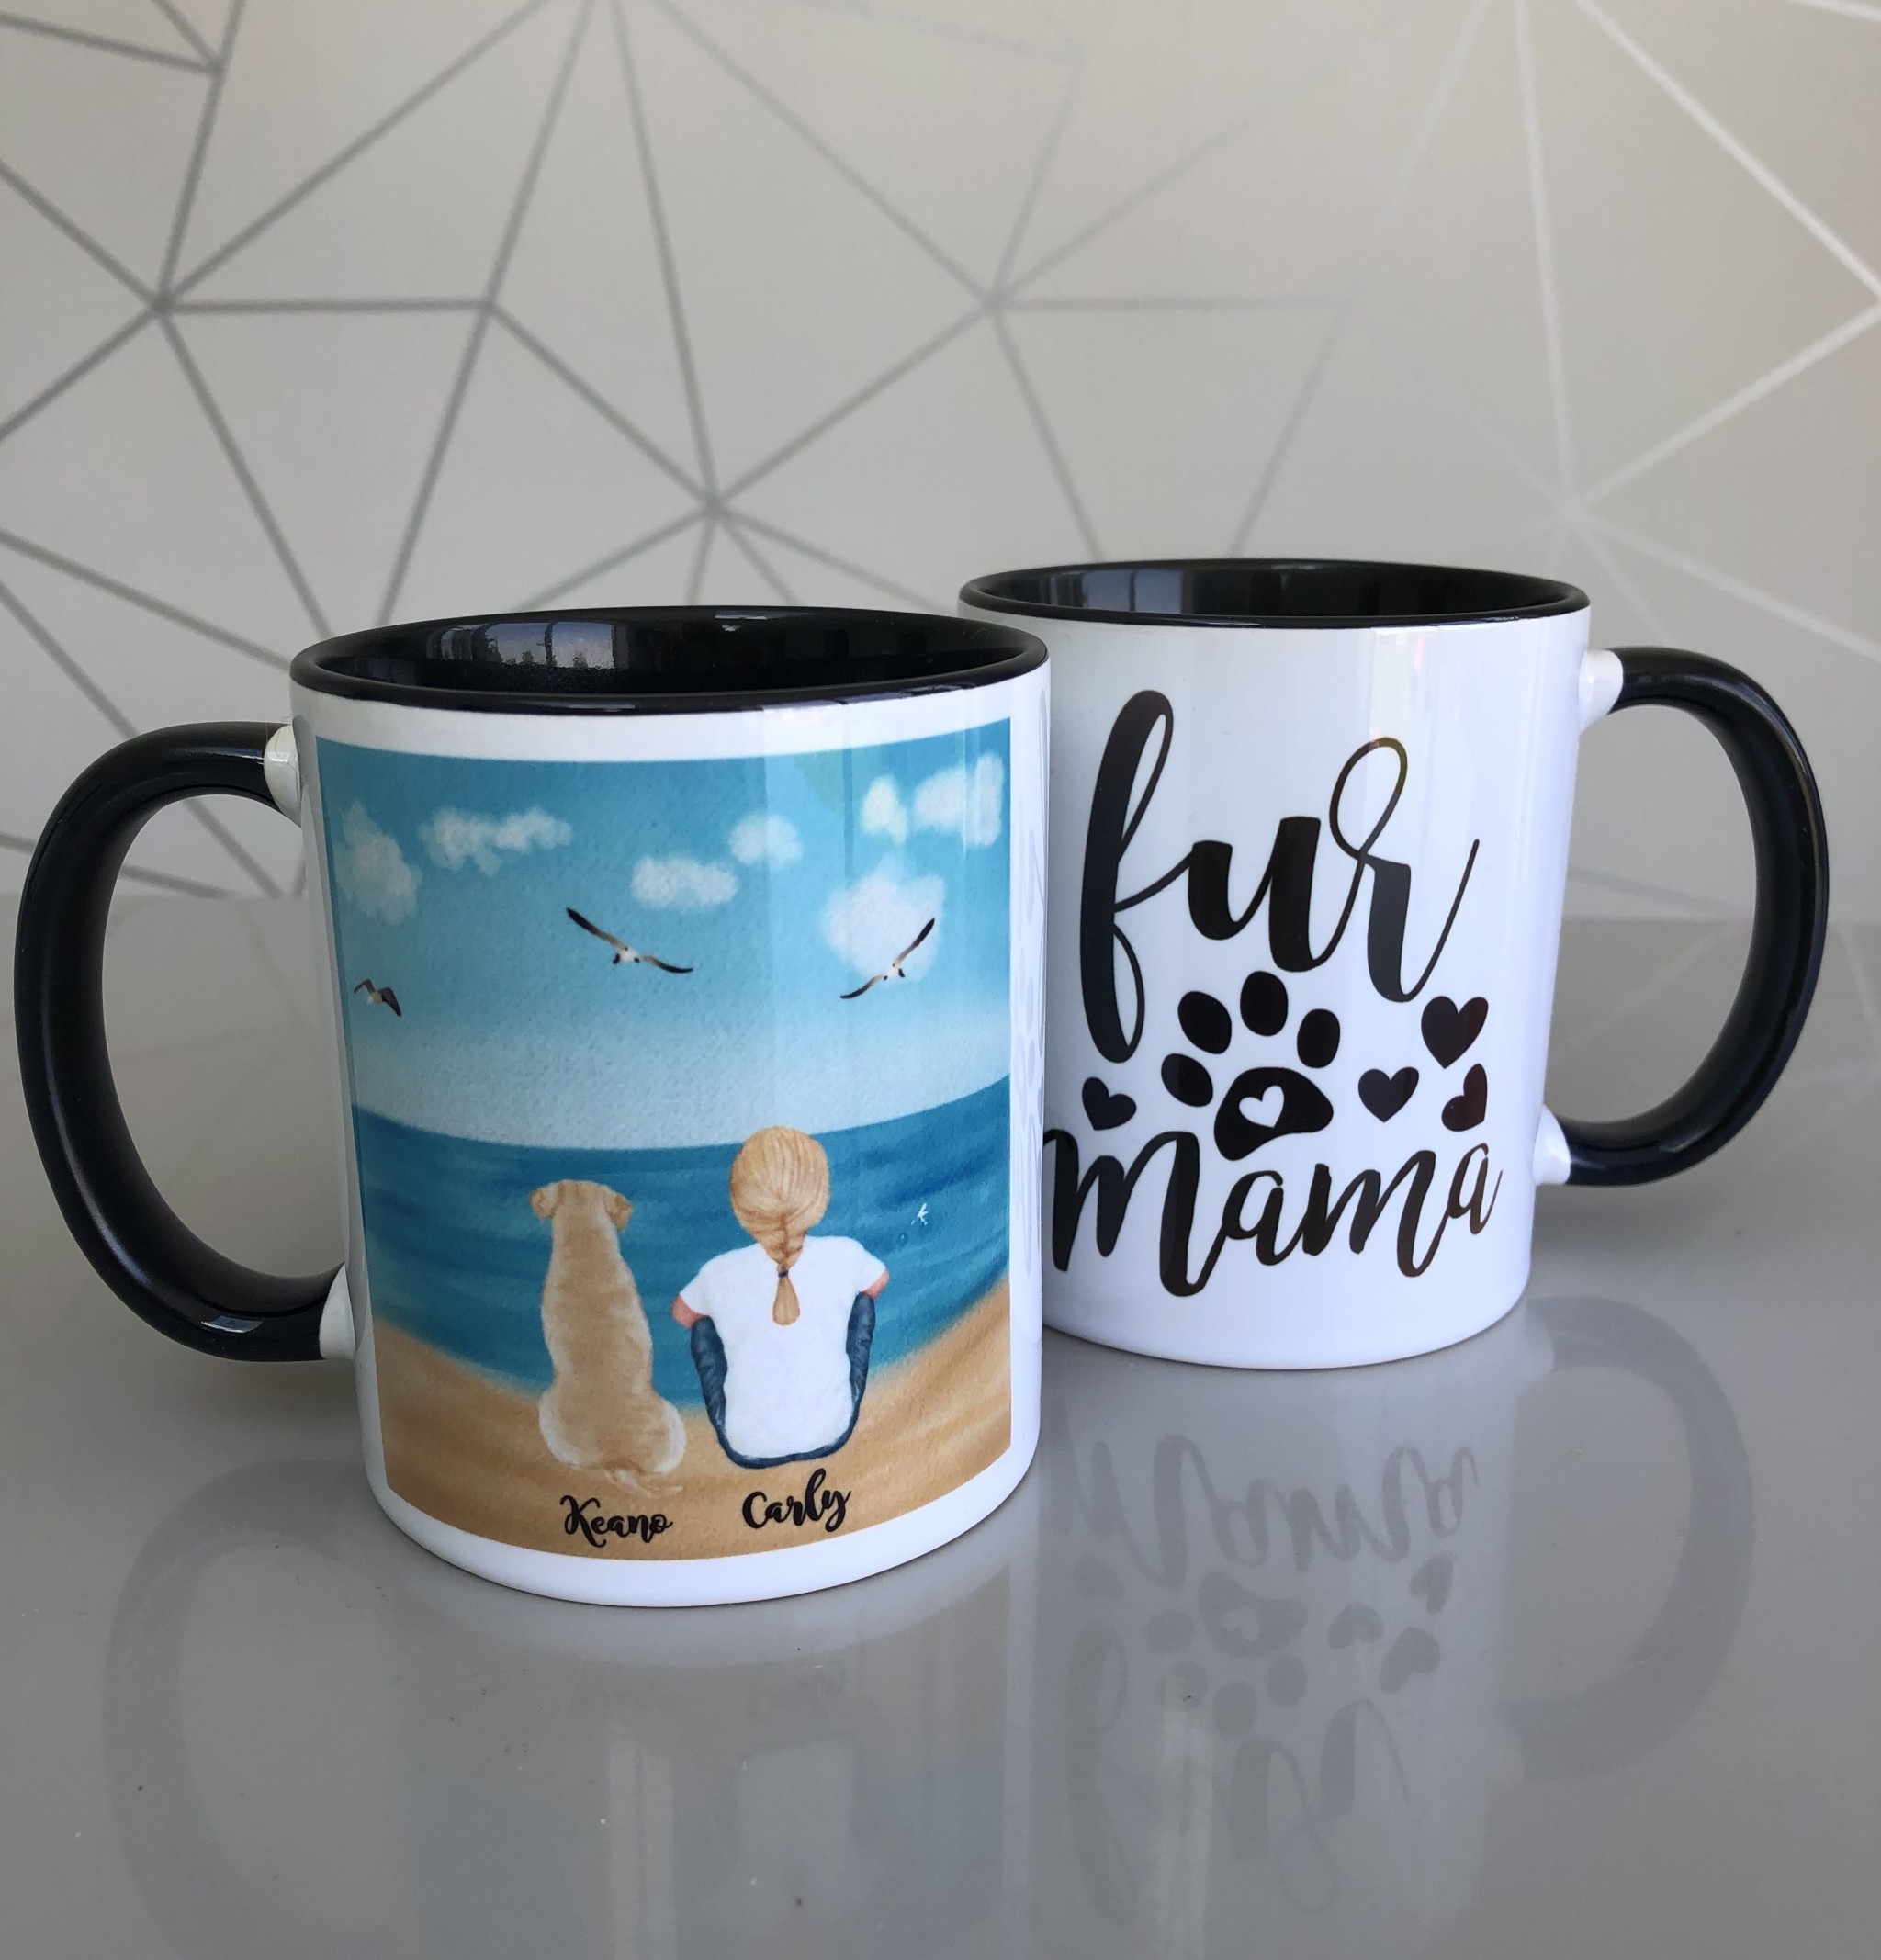 Auto Decal | Stickers, decals, printed mugs and coasters